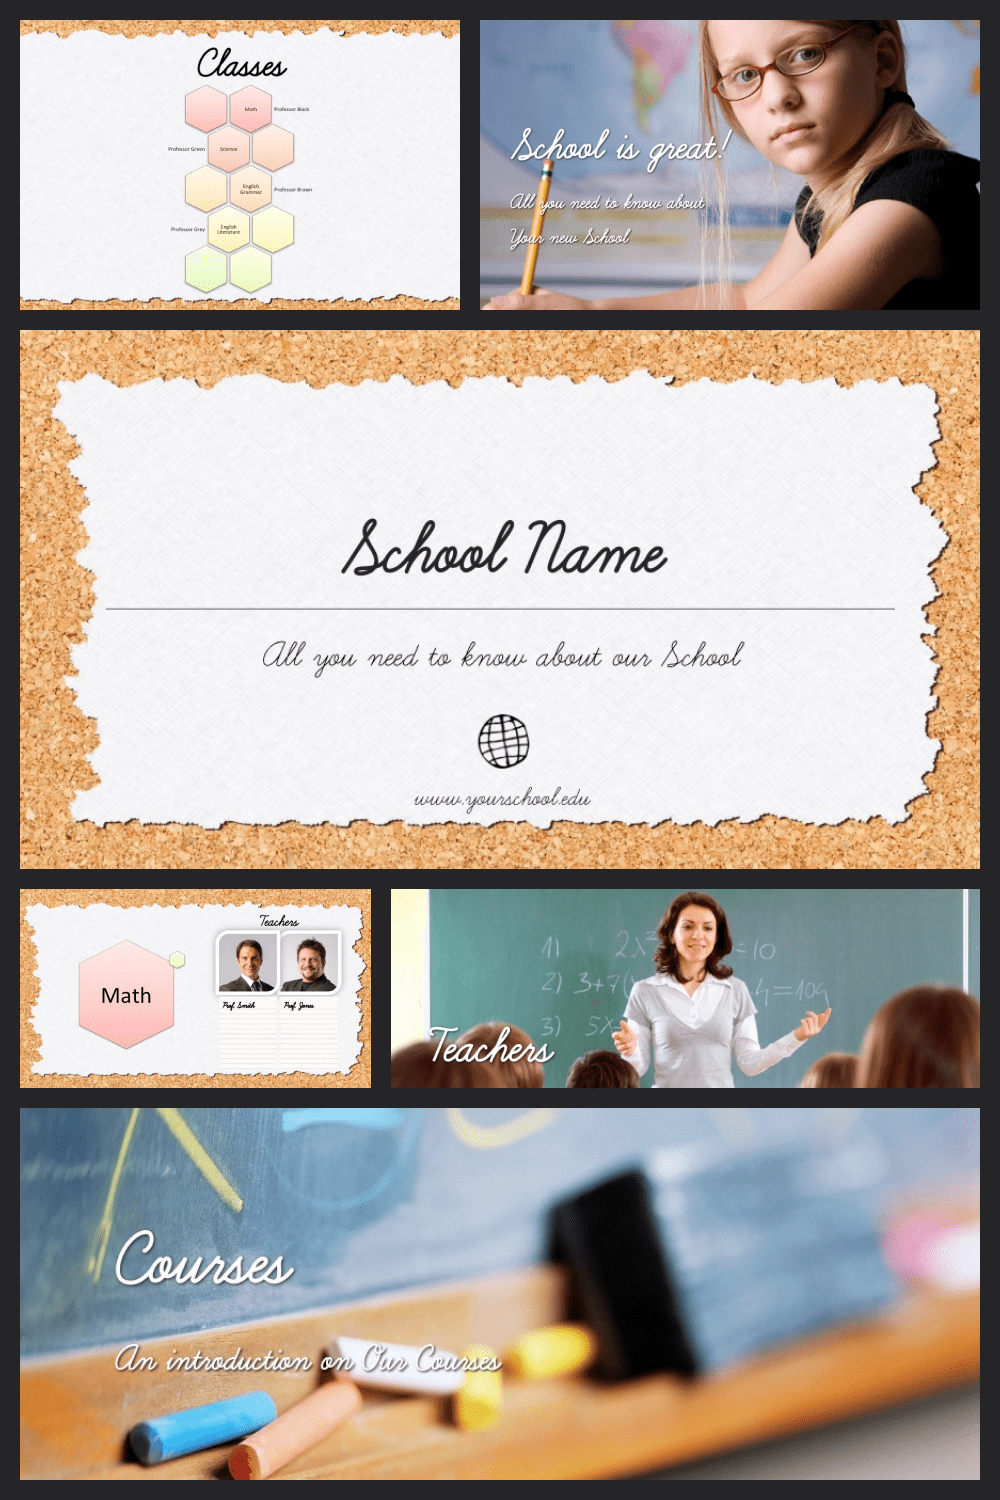 A simple standard school template with elements that remind you of learning.